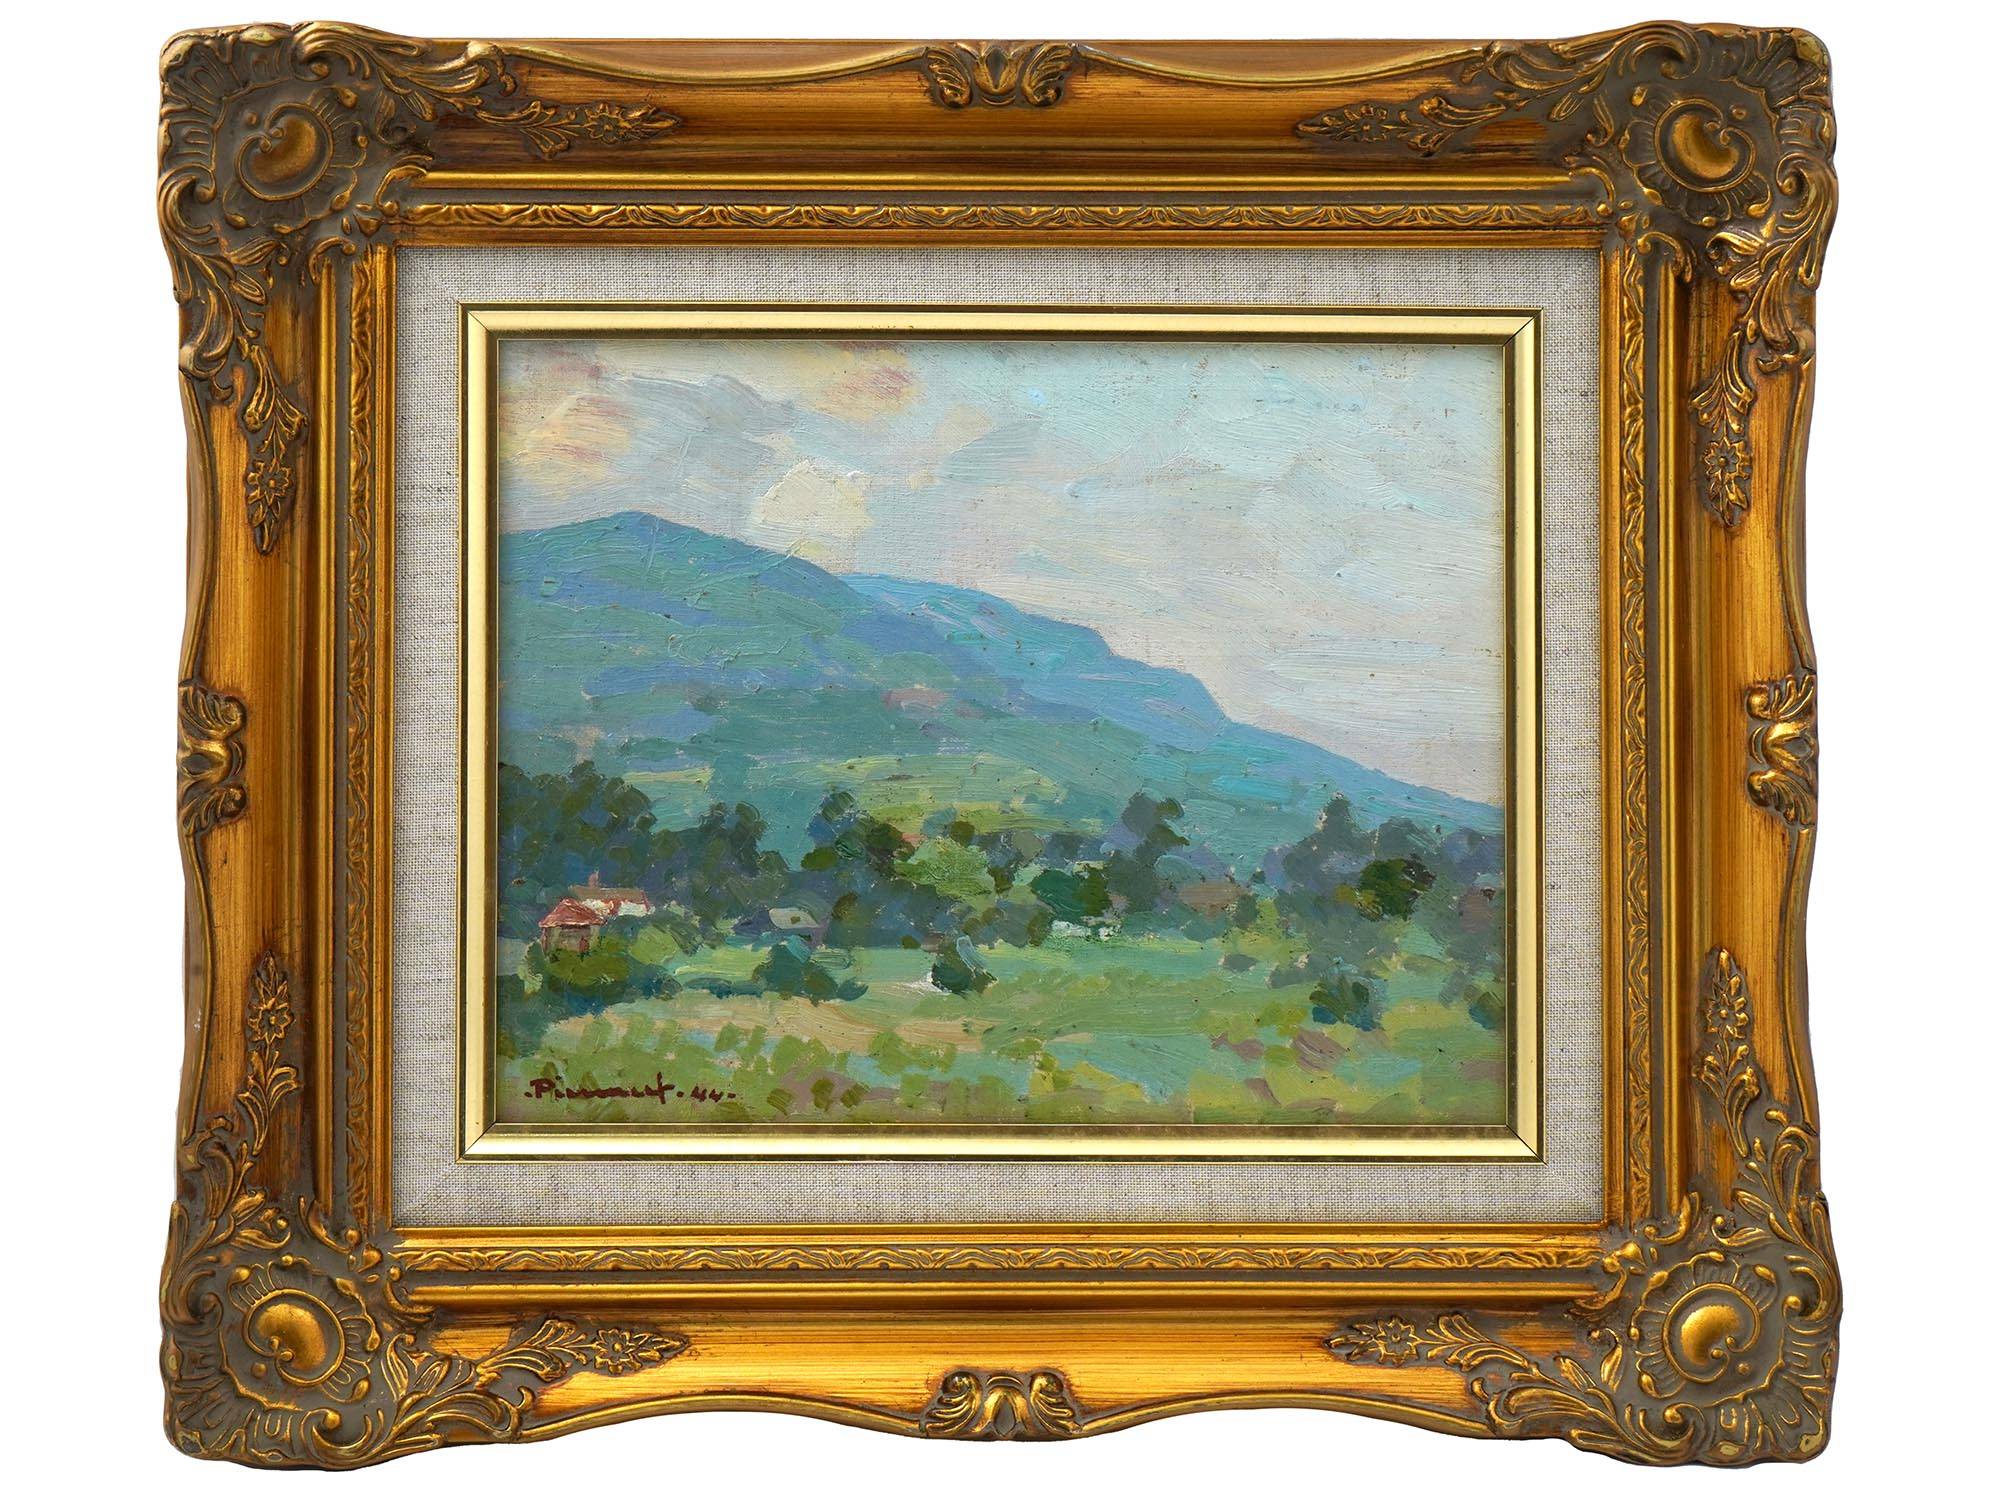 SIGNED JACOB HENDRIK PIERNEEF SOUTH AFRICAN OIL PAINTING PIC-0